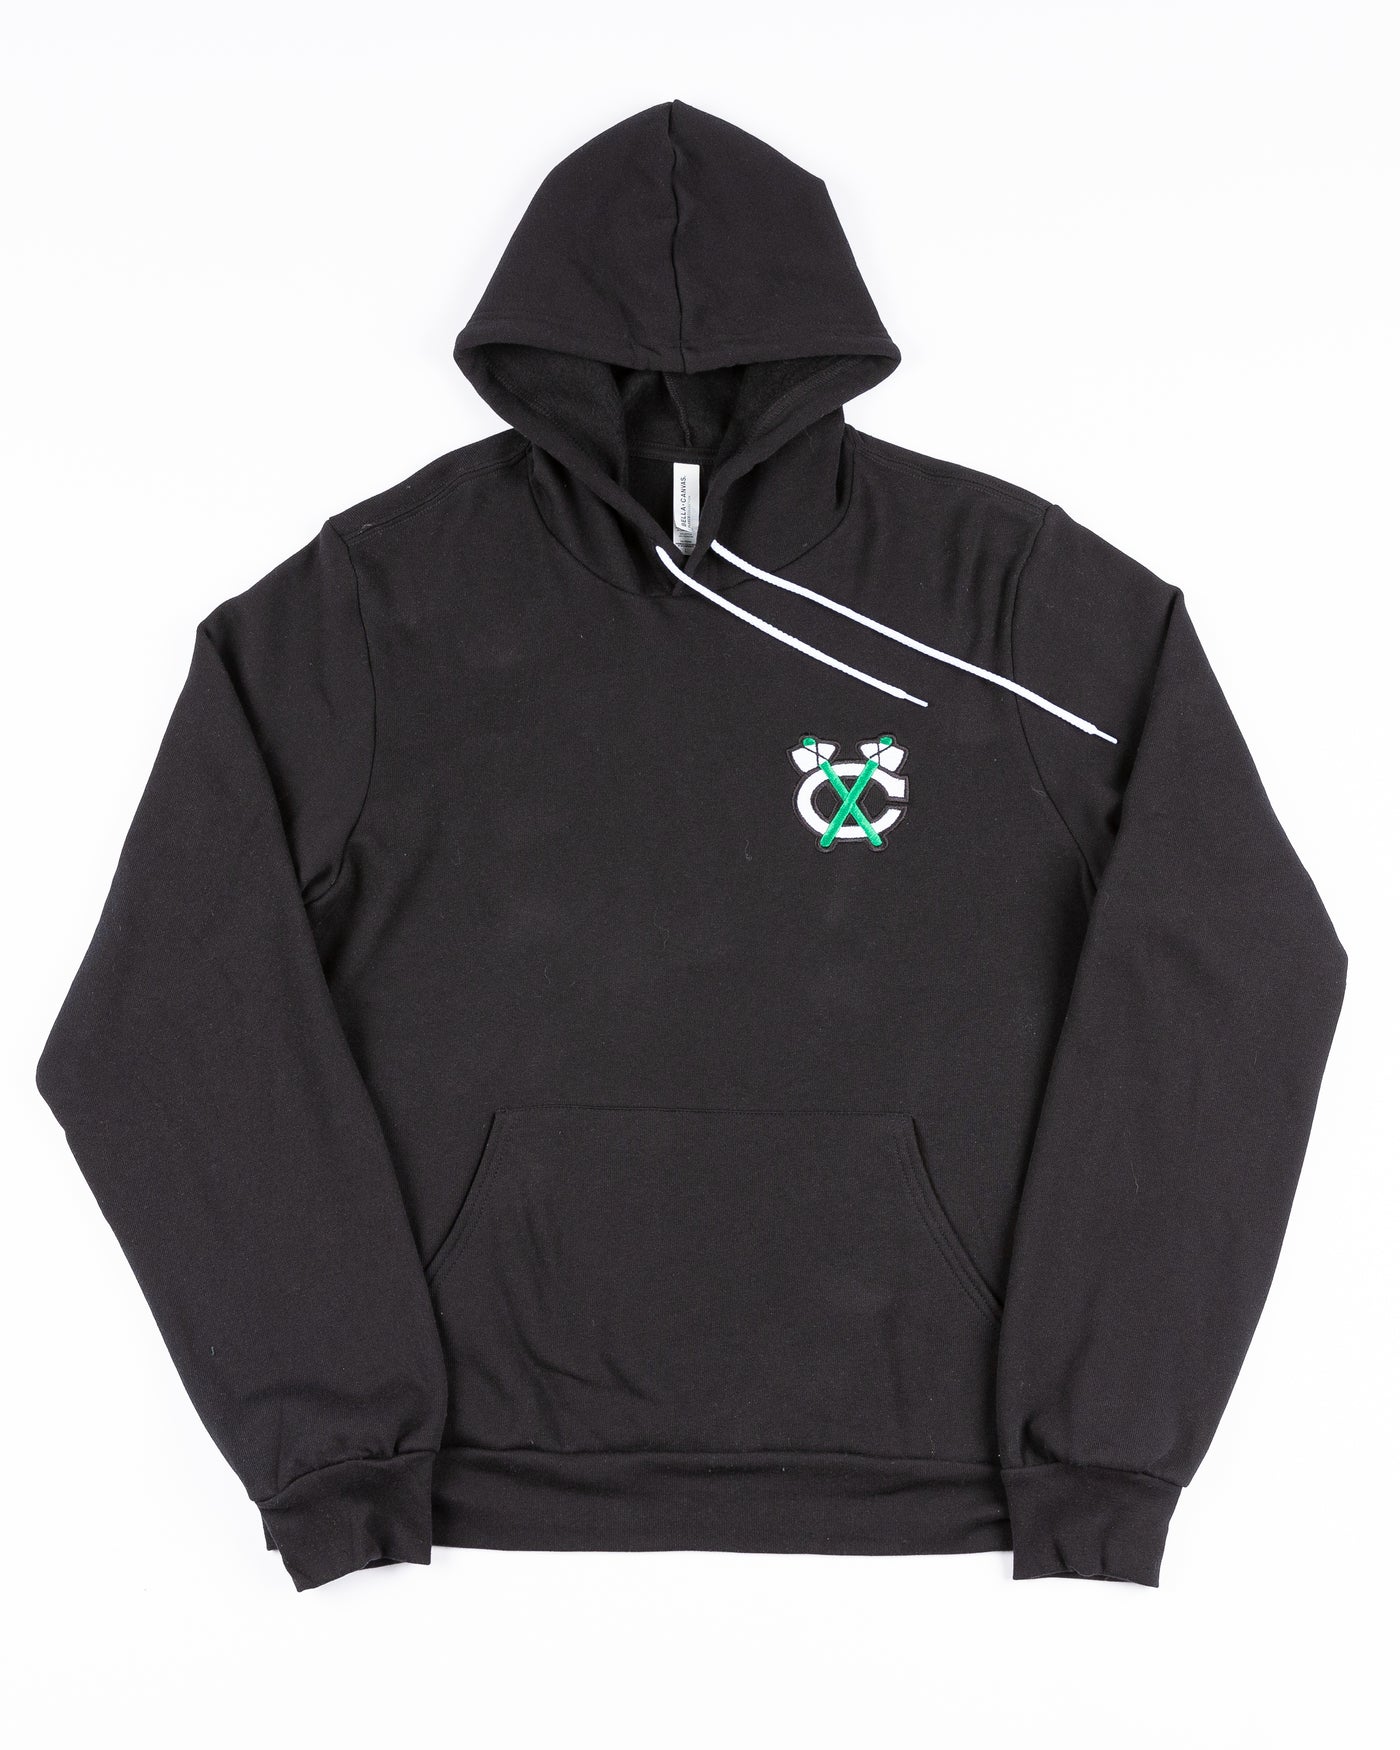 black Saint Patrick's day hoodie with Chicago Blackhawks secondary logo embroidered on left chest - front lay flat